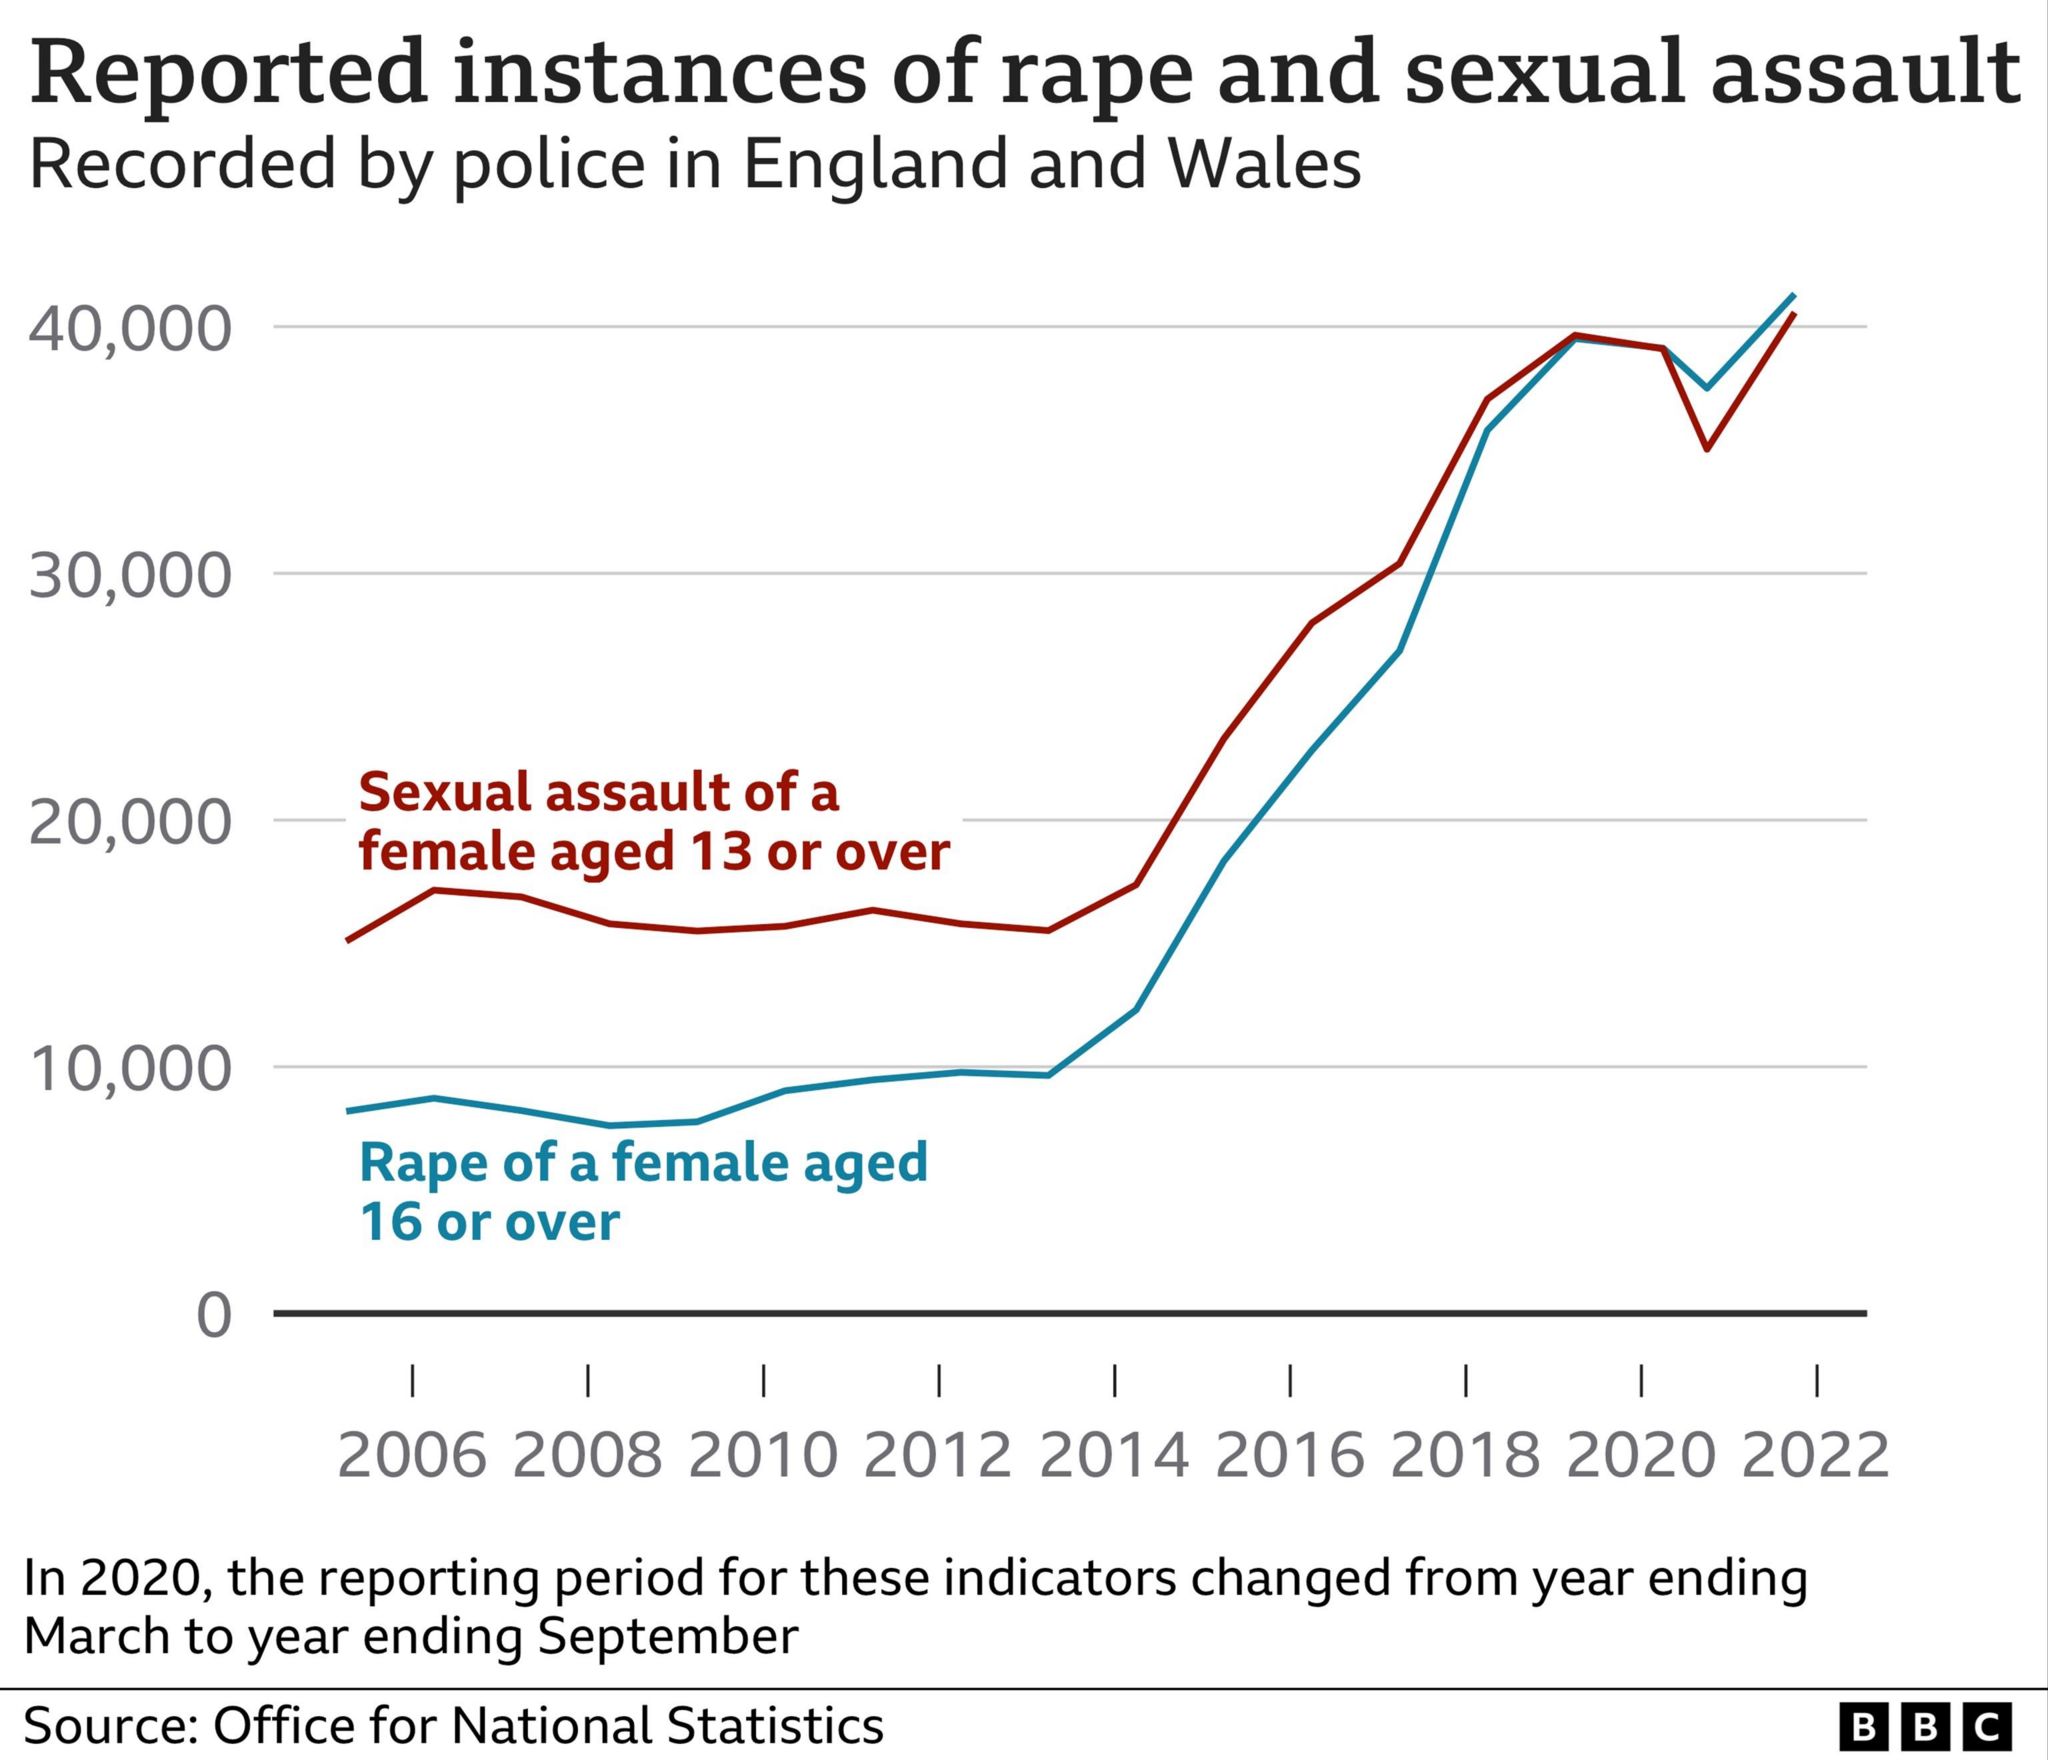 Graphic showing reported rapes and sexual assaults in England and Wales